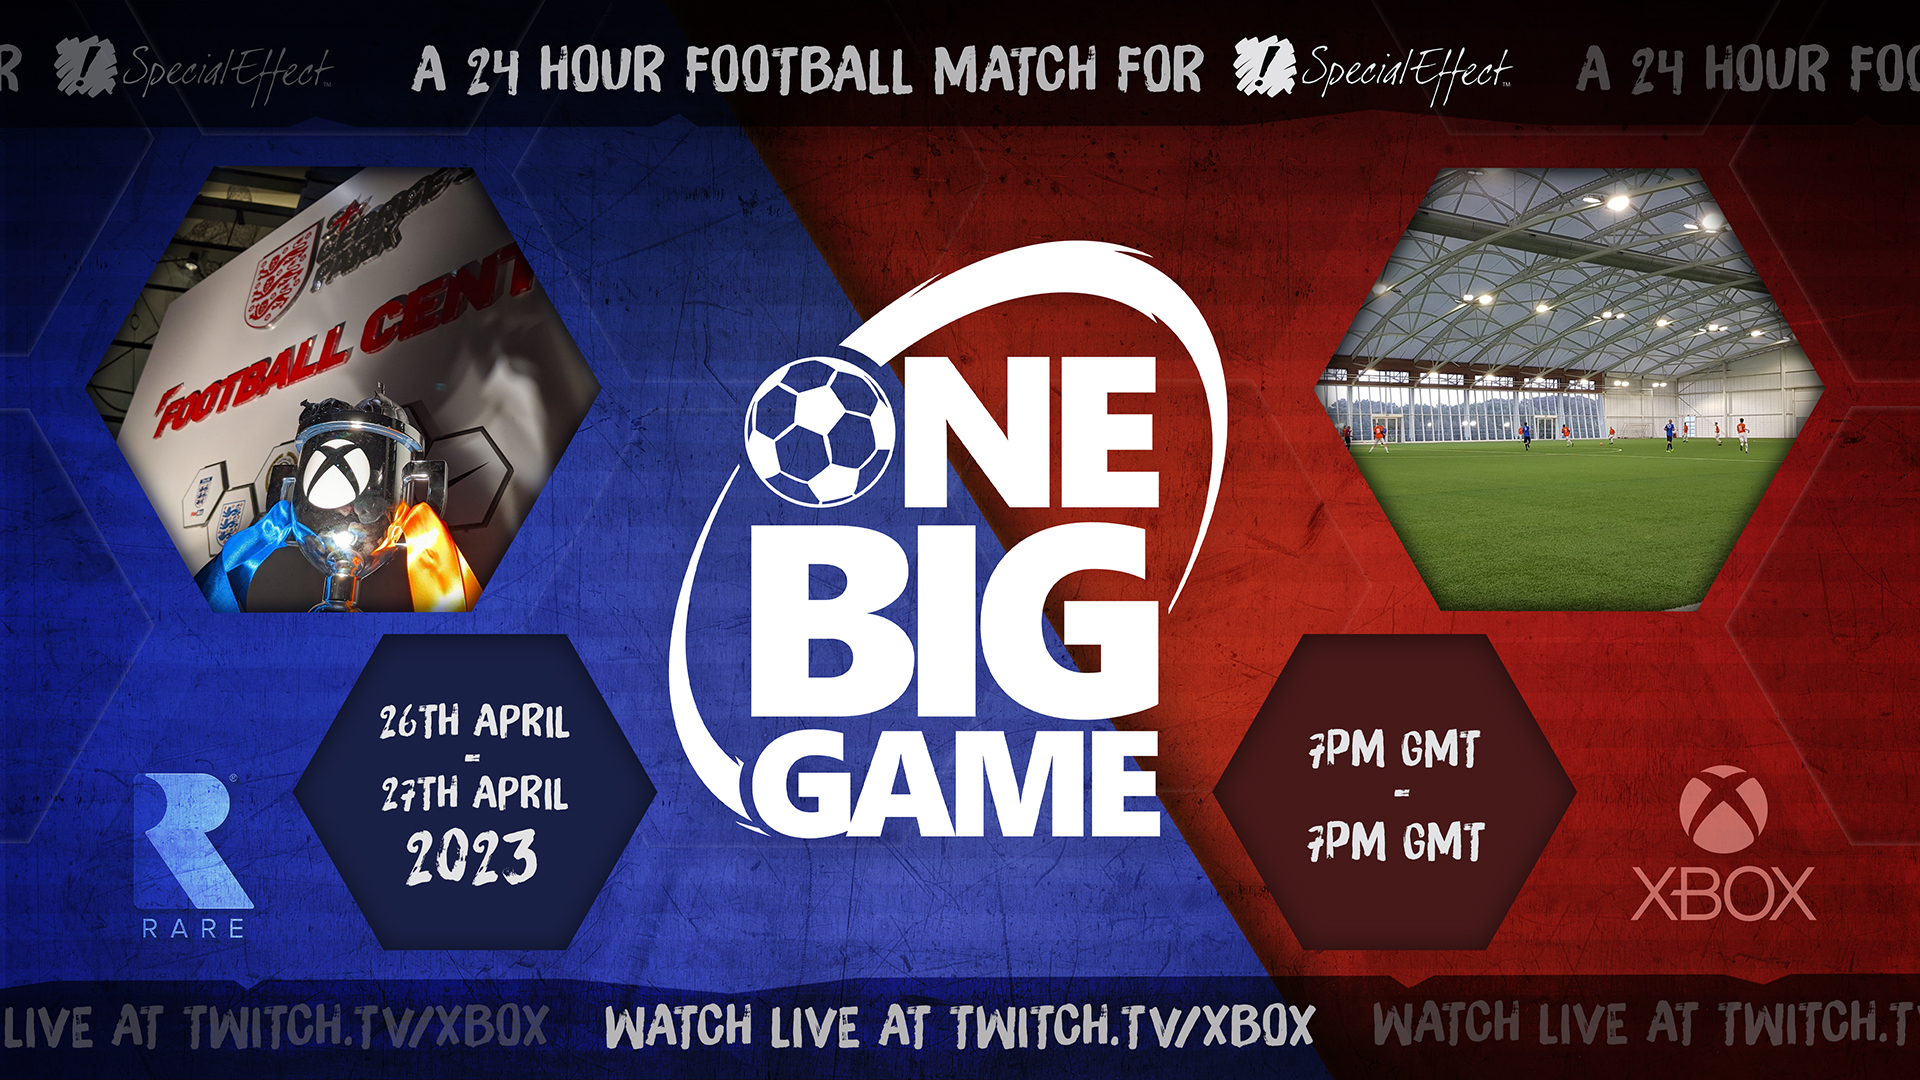 One Big Game: UK Game Studios Tackle 24-Hour Football Match fir SpecialEffect - Xbox Wire